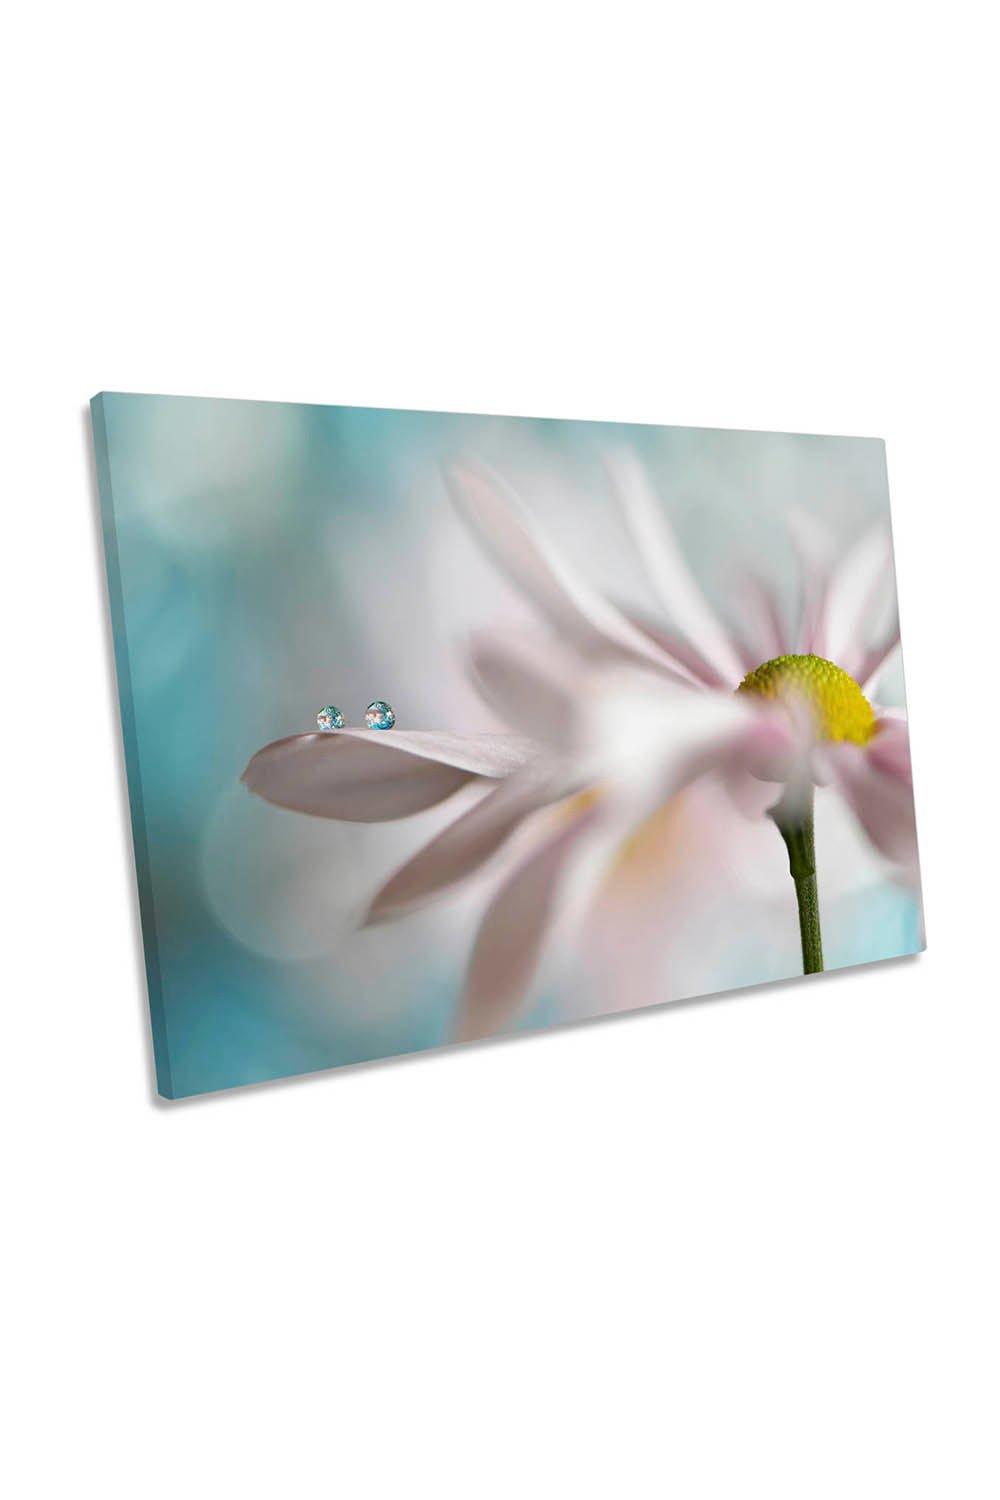 Tiny Duo Waterdrops Pink Flower Canvas Wall Art Picture Print